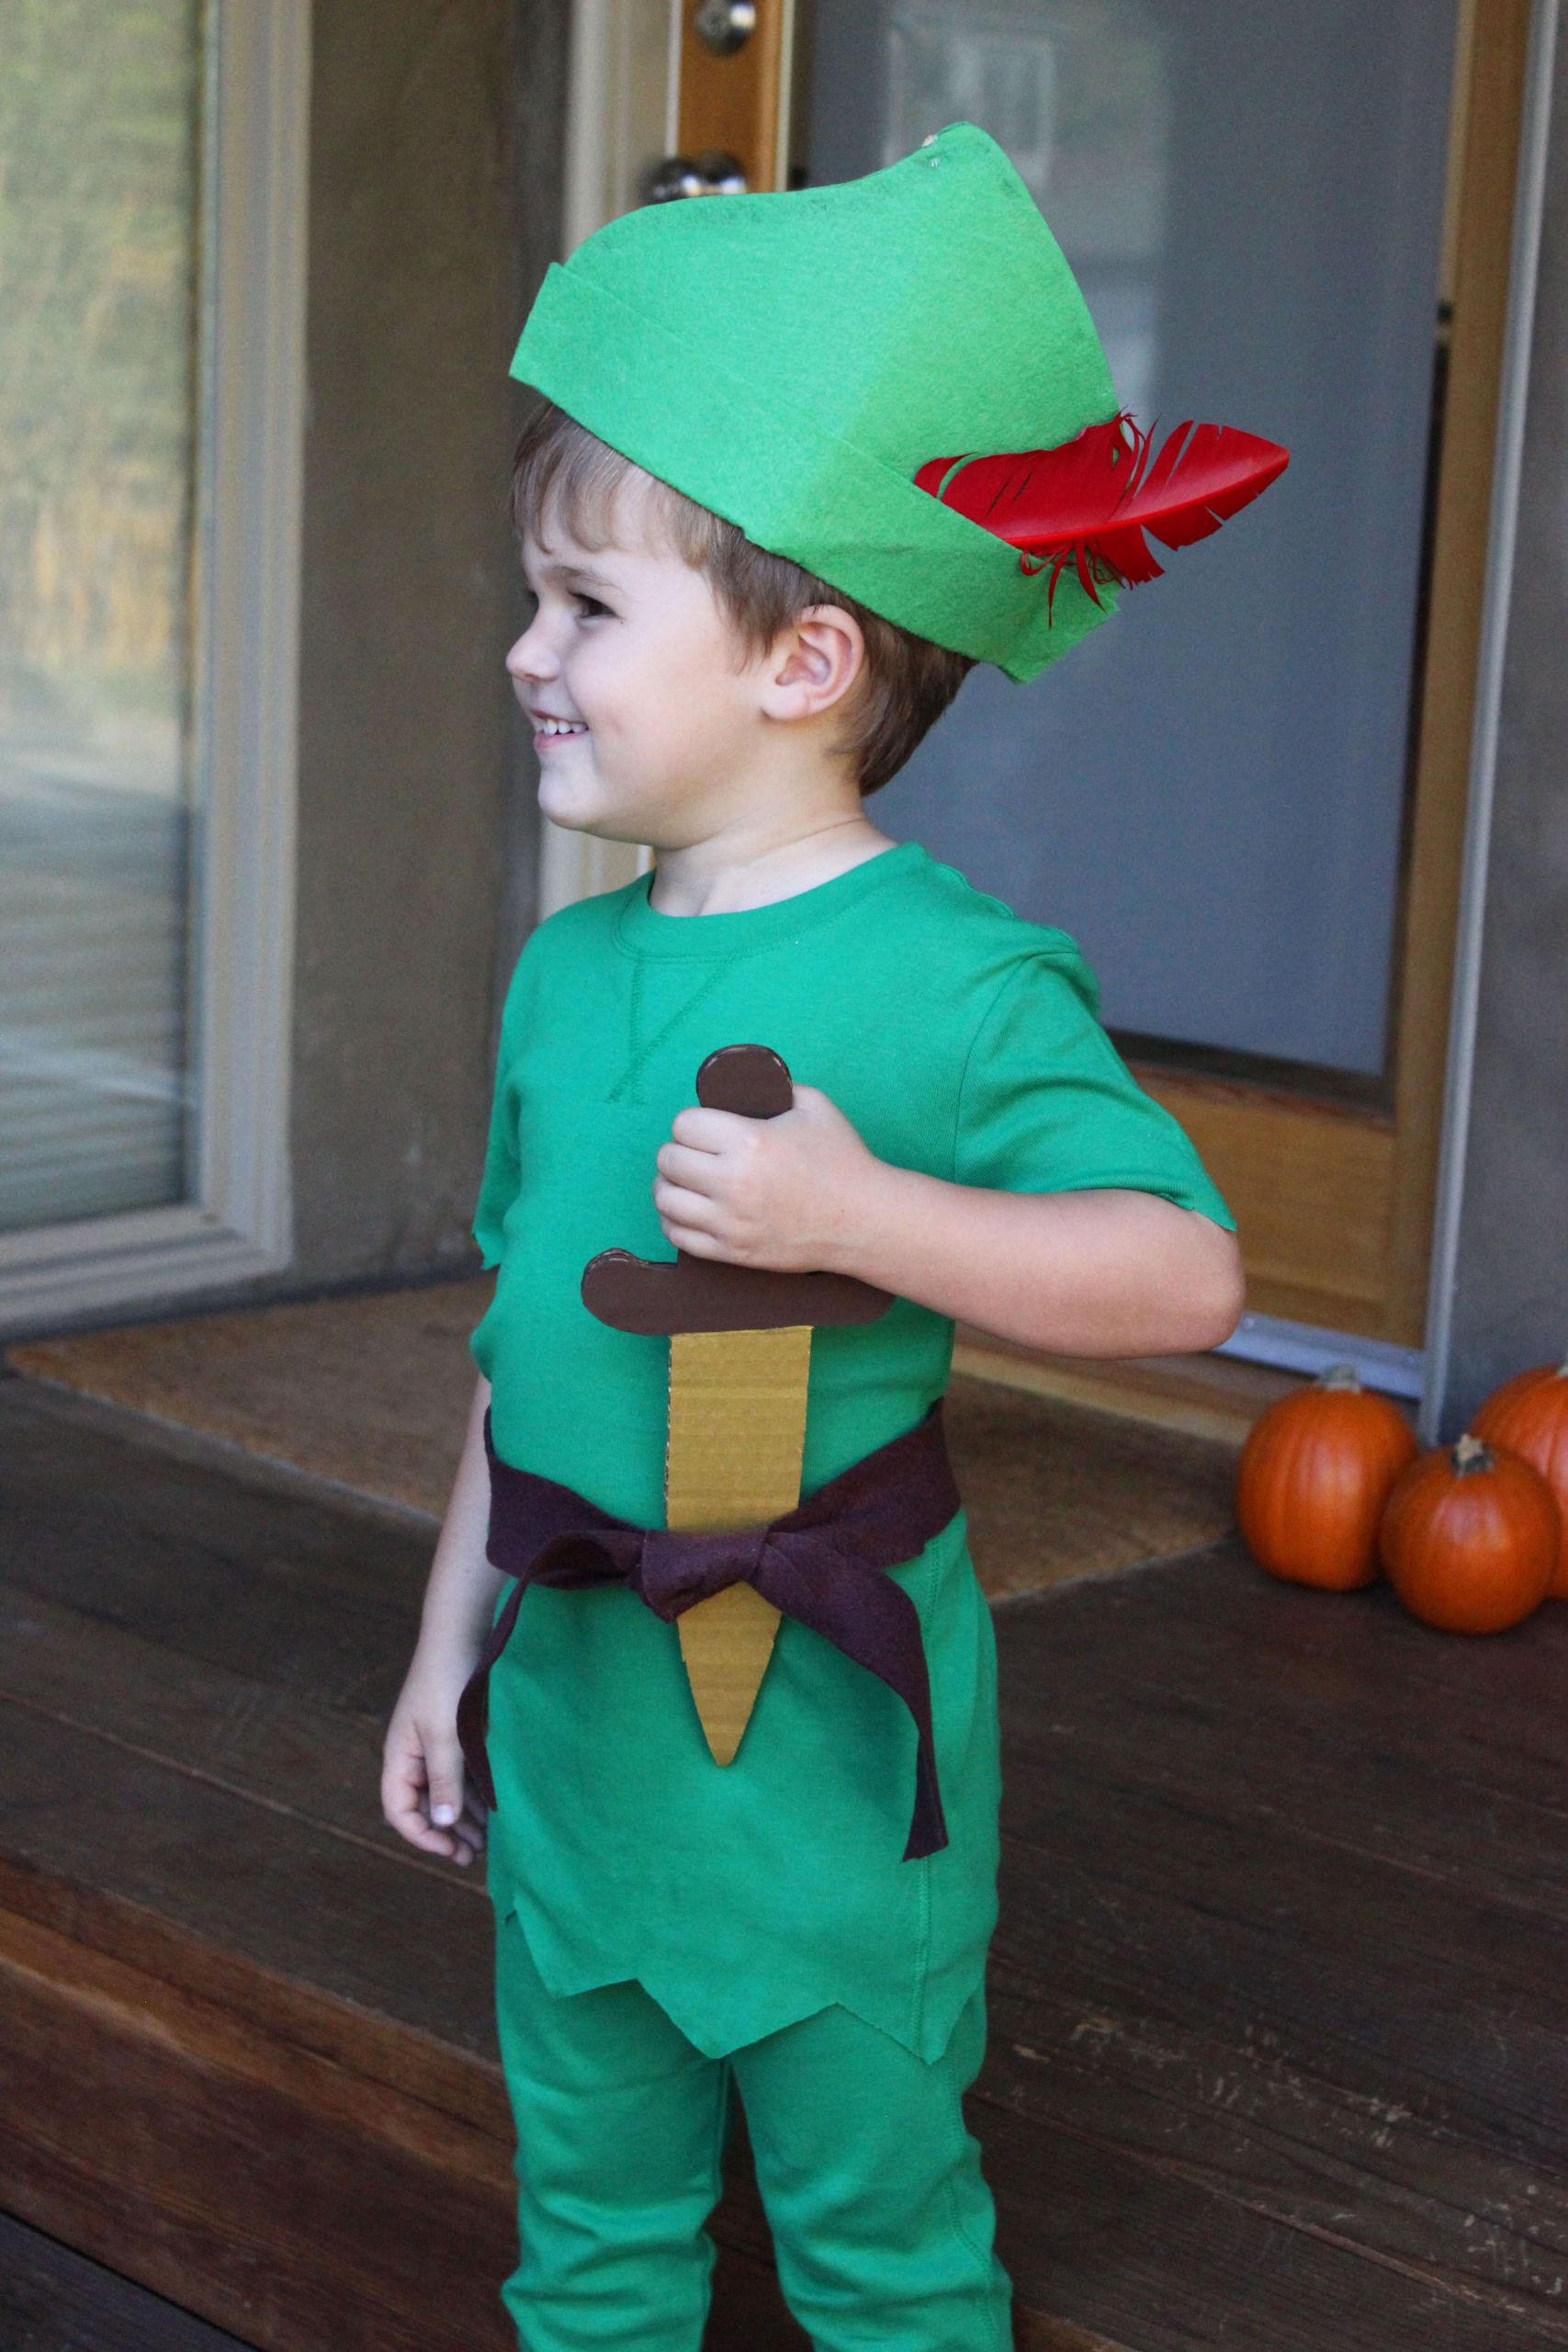 DIY Toddler Peter Pan Costume
 Easy DIY Peter Pan costume for kids no sewing required